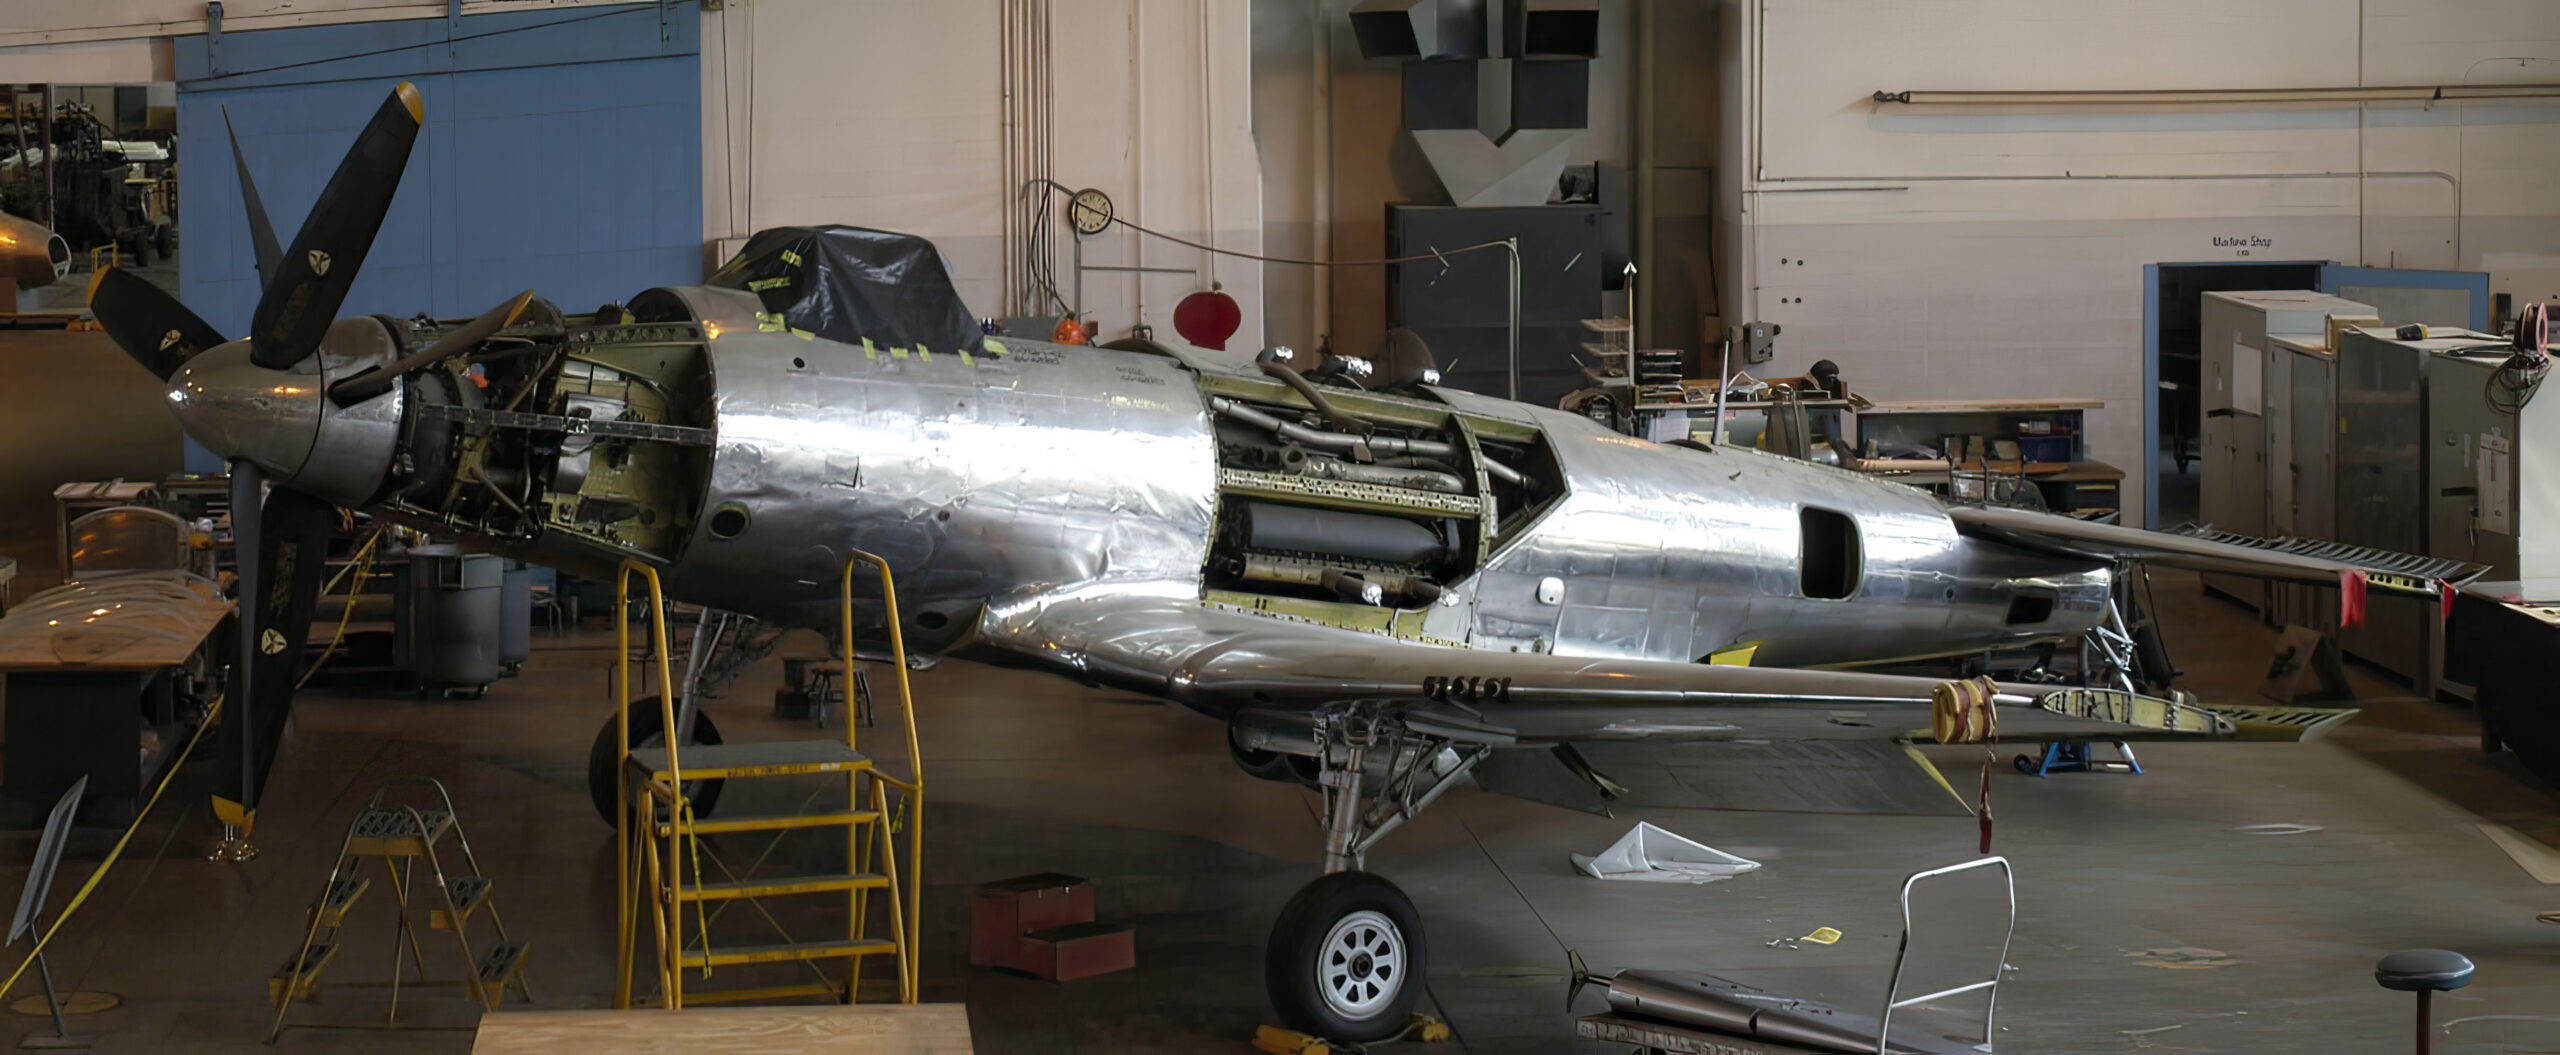 Restoration of the Fisher XP-75A Eagle at The National Museum of the United States Air Force Dayton, OH.